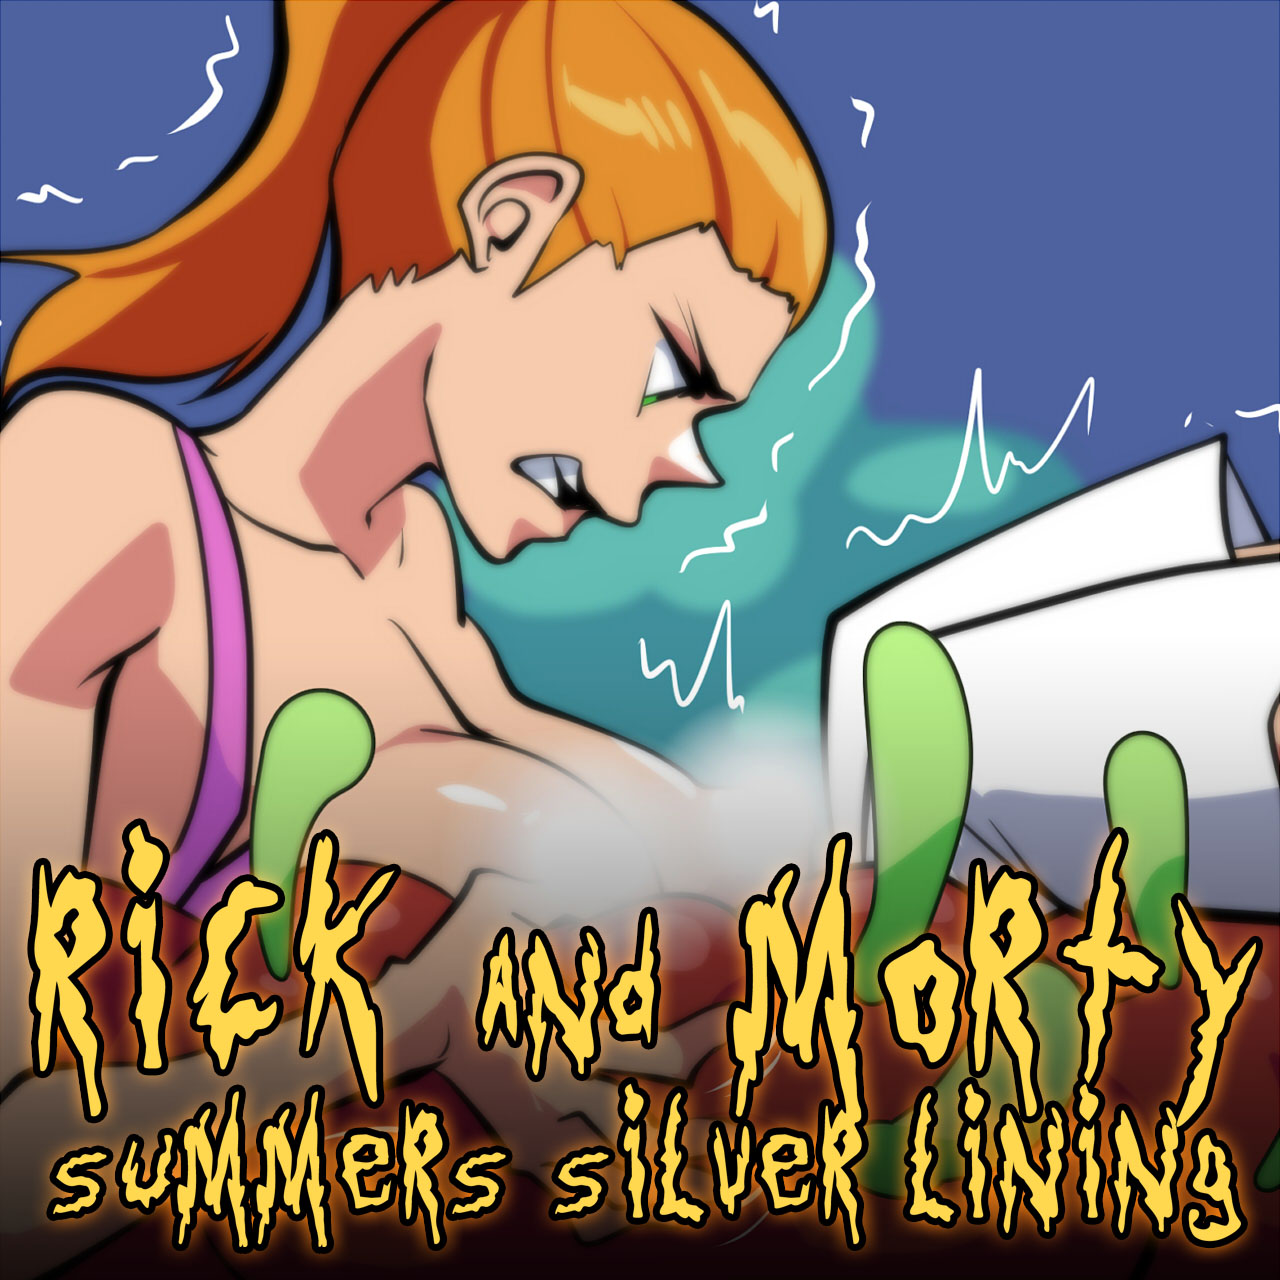 Rick and Morty: Summer's Silver Lining